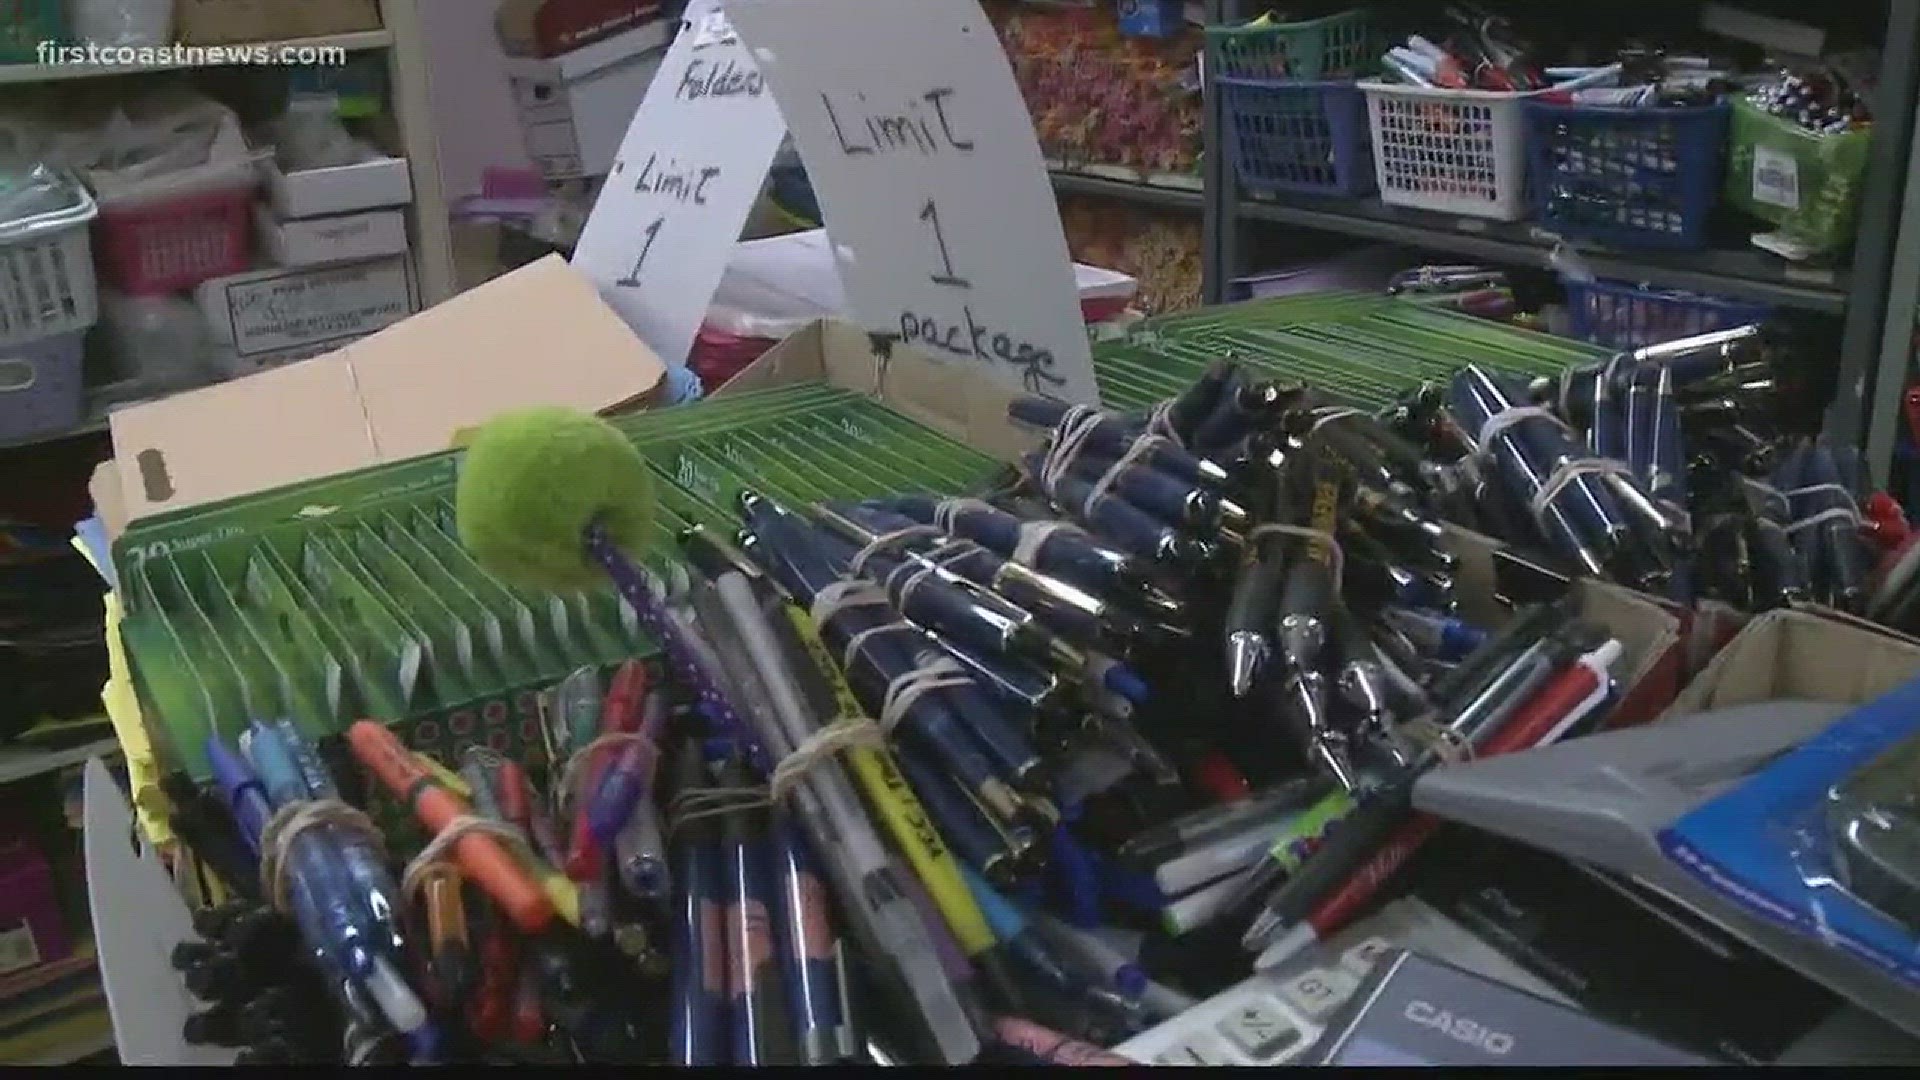 The Supply Depot would provide teachers with school supplies, but it was temporarily closed due to safety concerns.